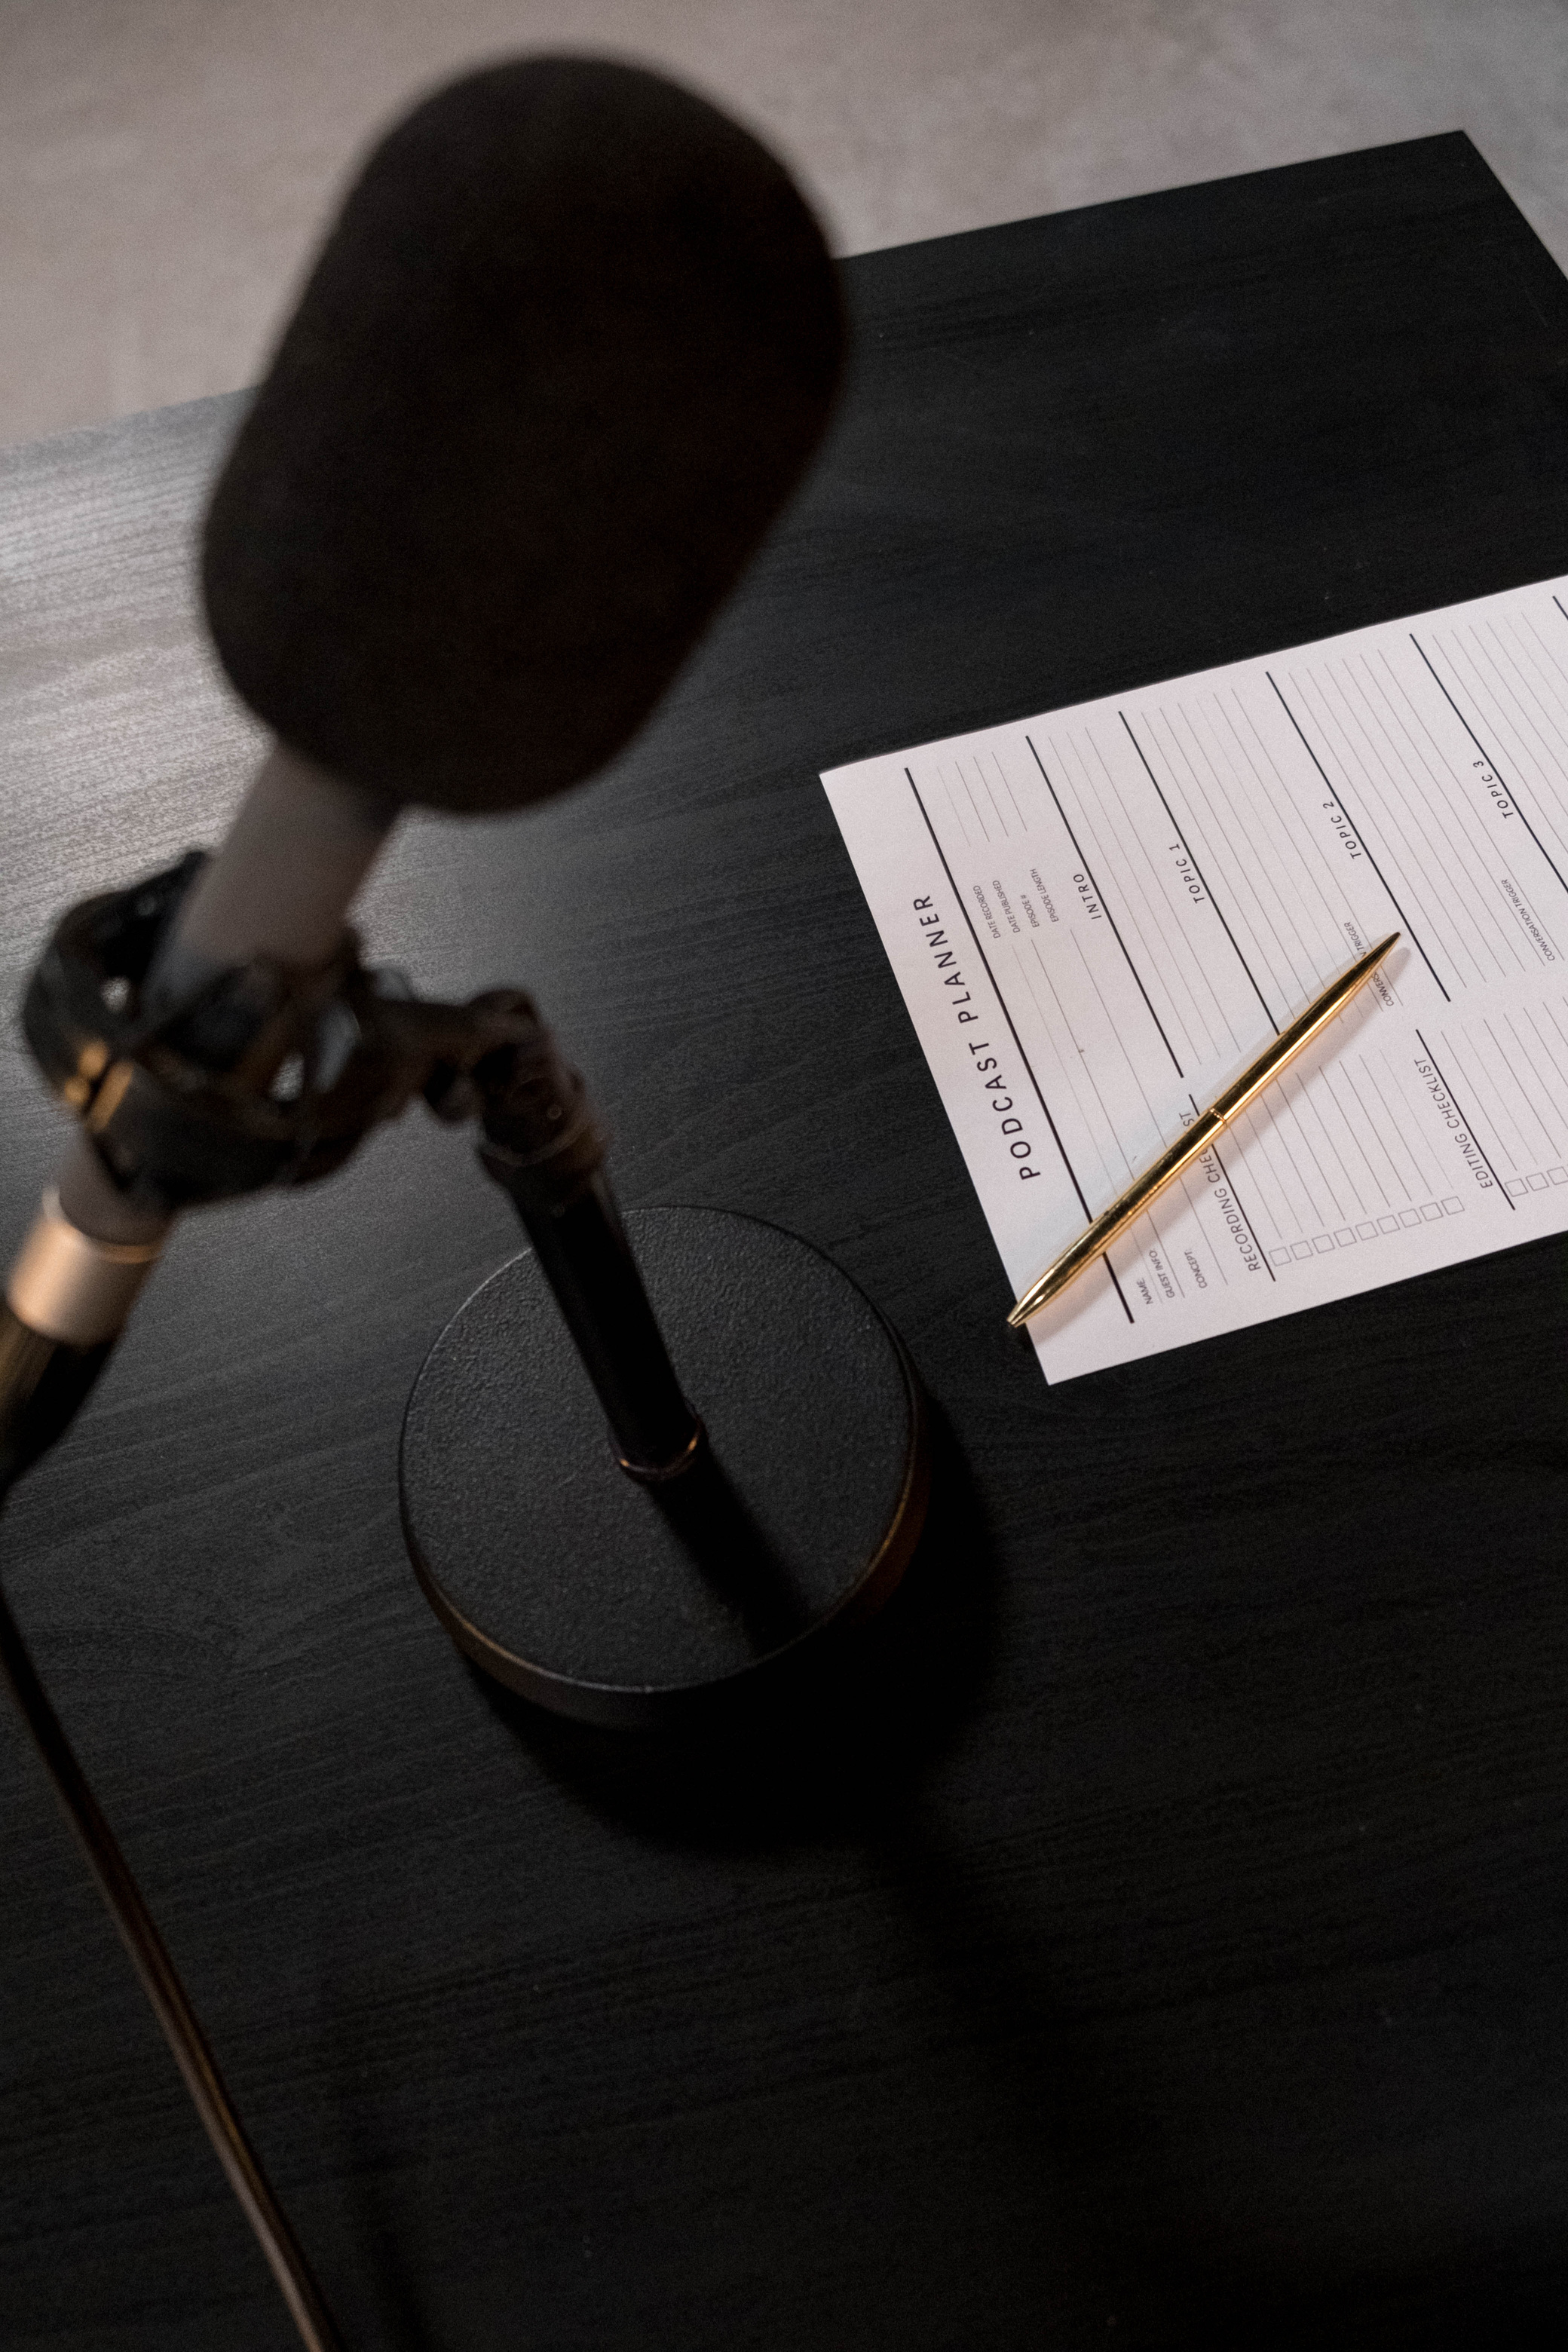 Black and Gray Microphone on White Paper